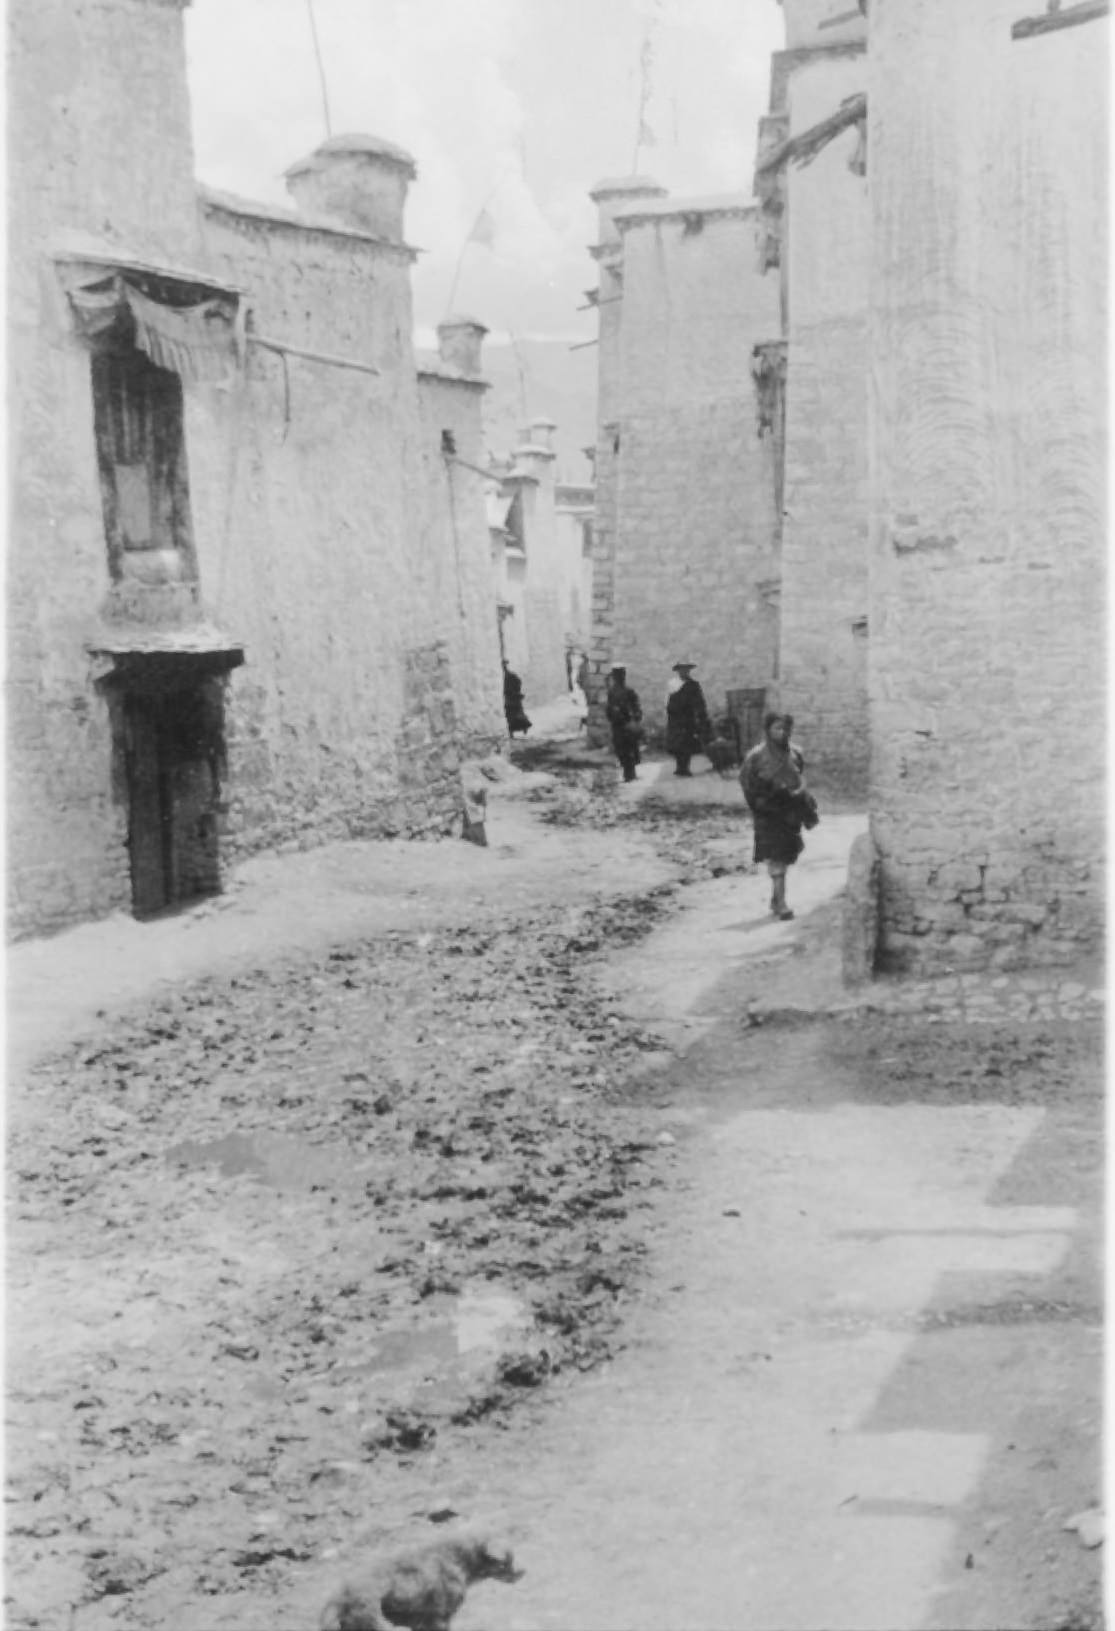 A Street in Lhasa, 1944